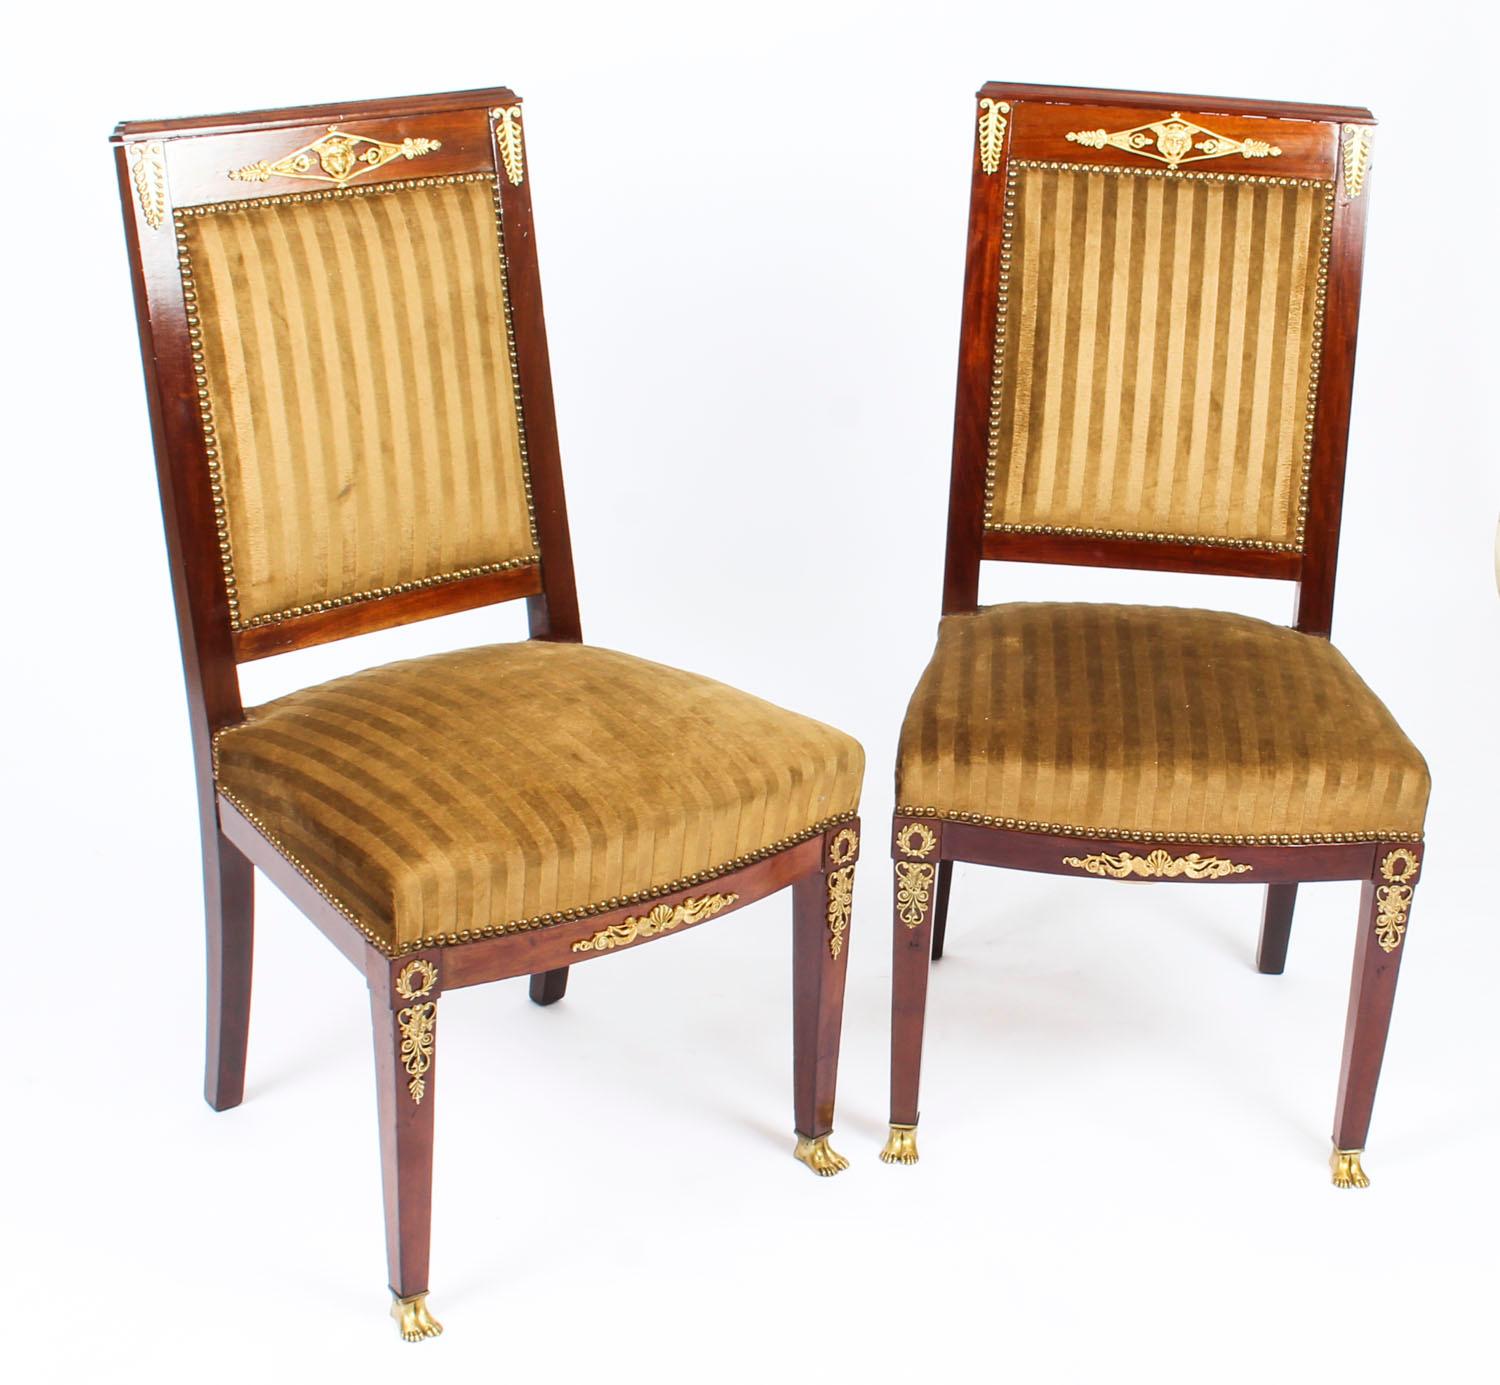 This is a fantastic and highly decorative antique French gilt bronze mounted Empire Revival pair of side chairs, circa 1880 in date.

Crafted from fabulous solid mahogany and smothered in fabulous high quality ormolu mounts reminiscent of the